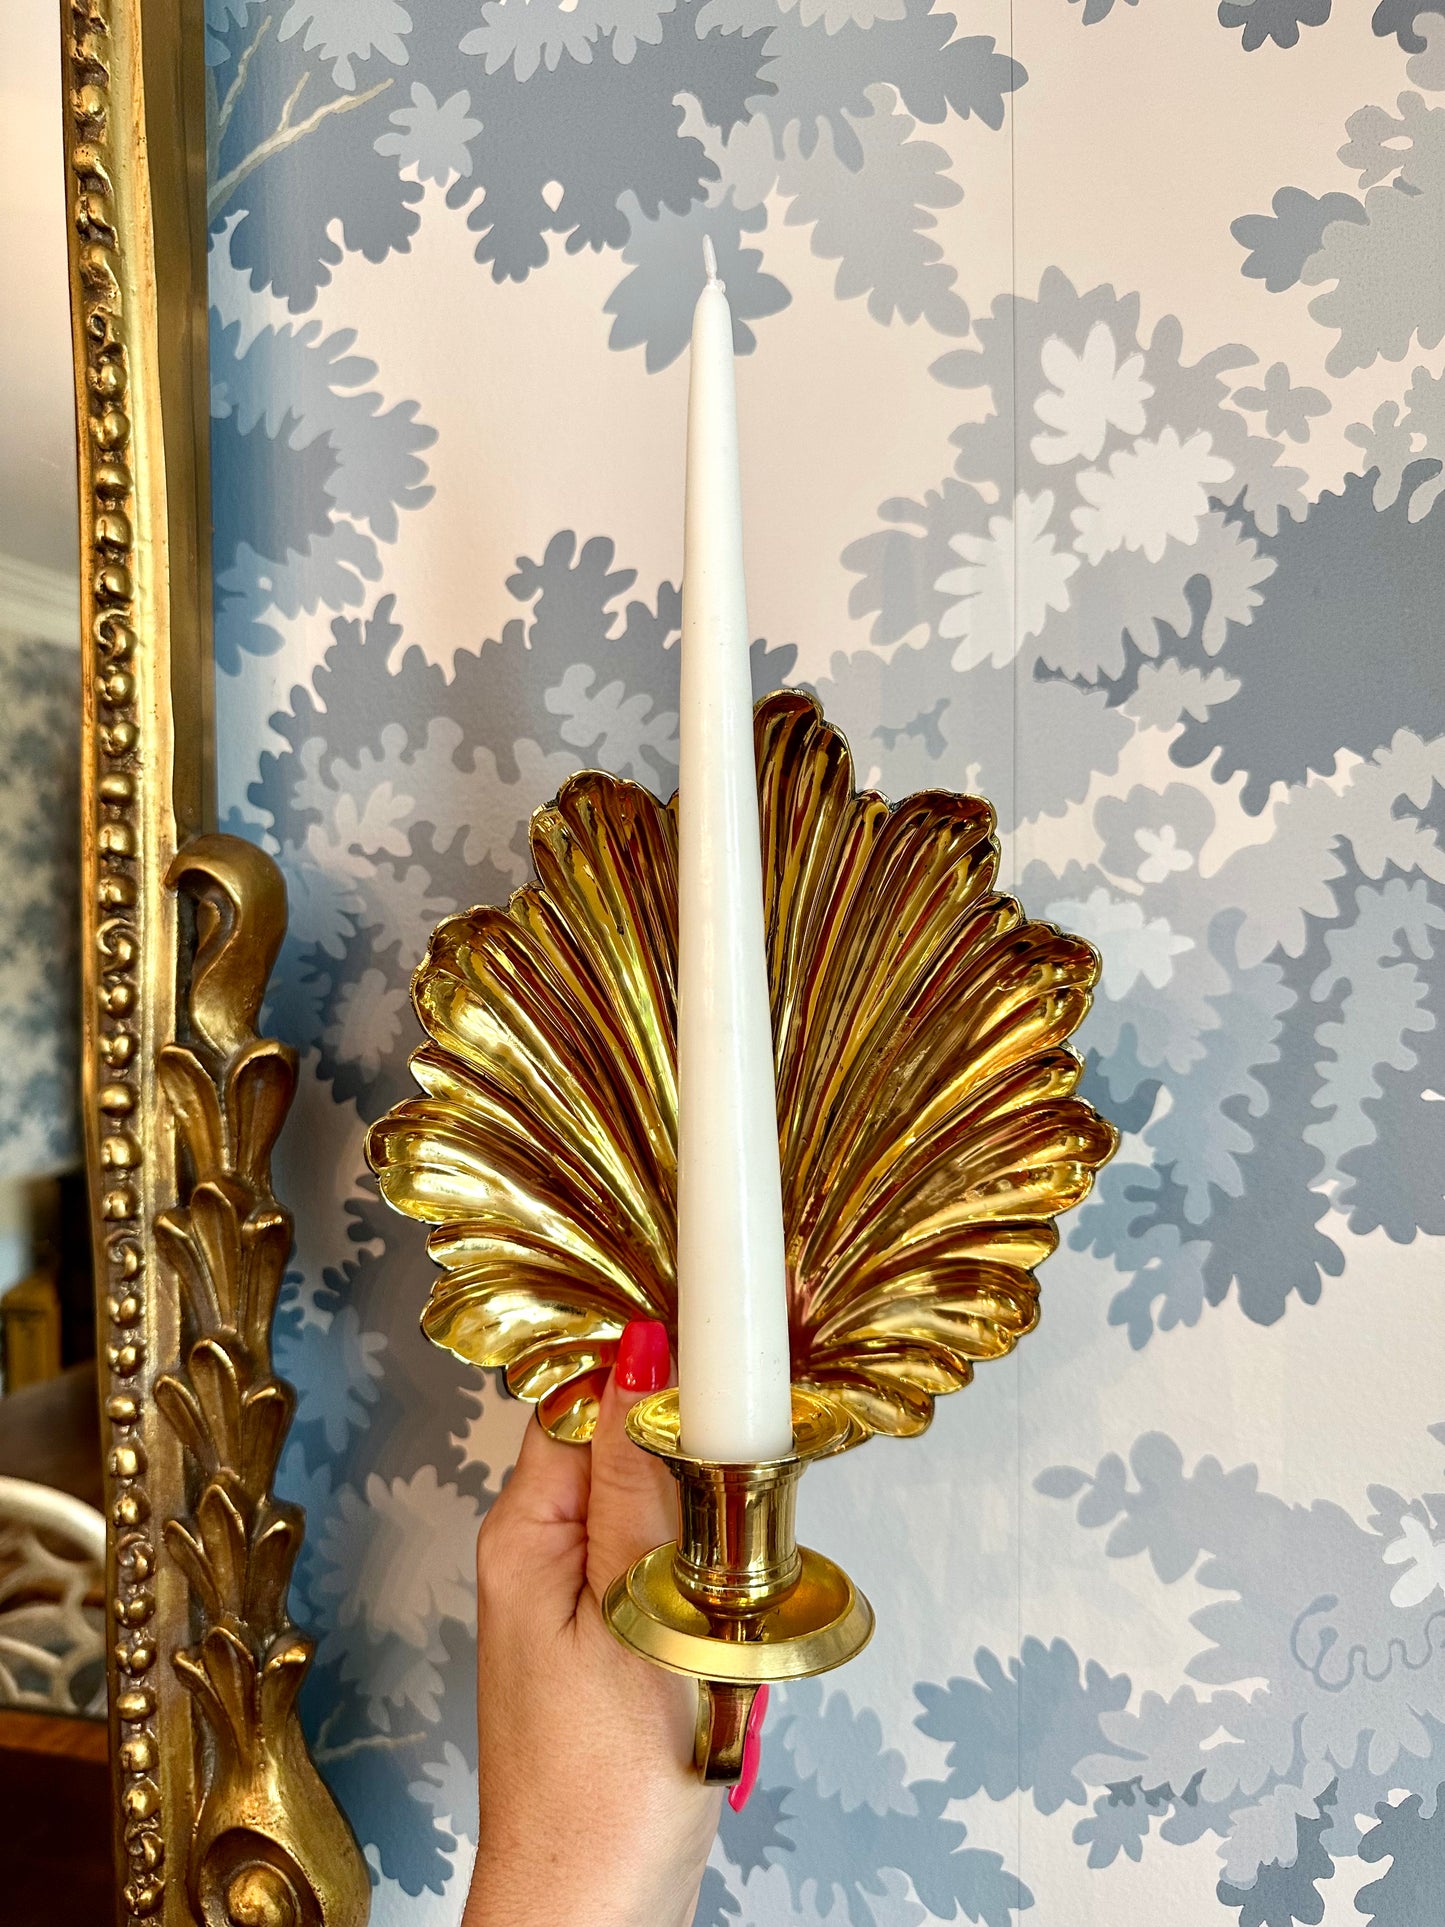 Pair of Fabulous Brass Shell Candle Wall Sconce Holders